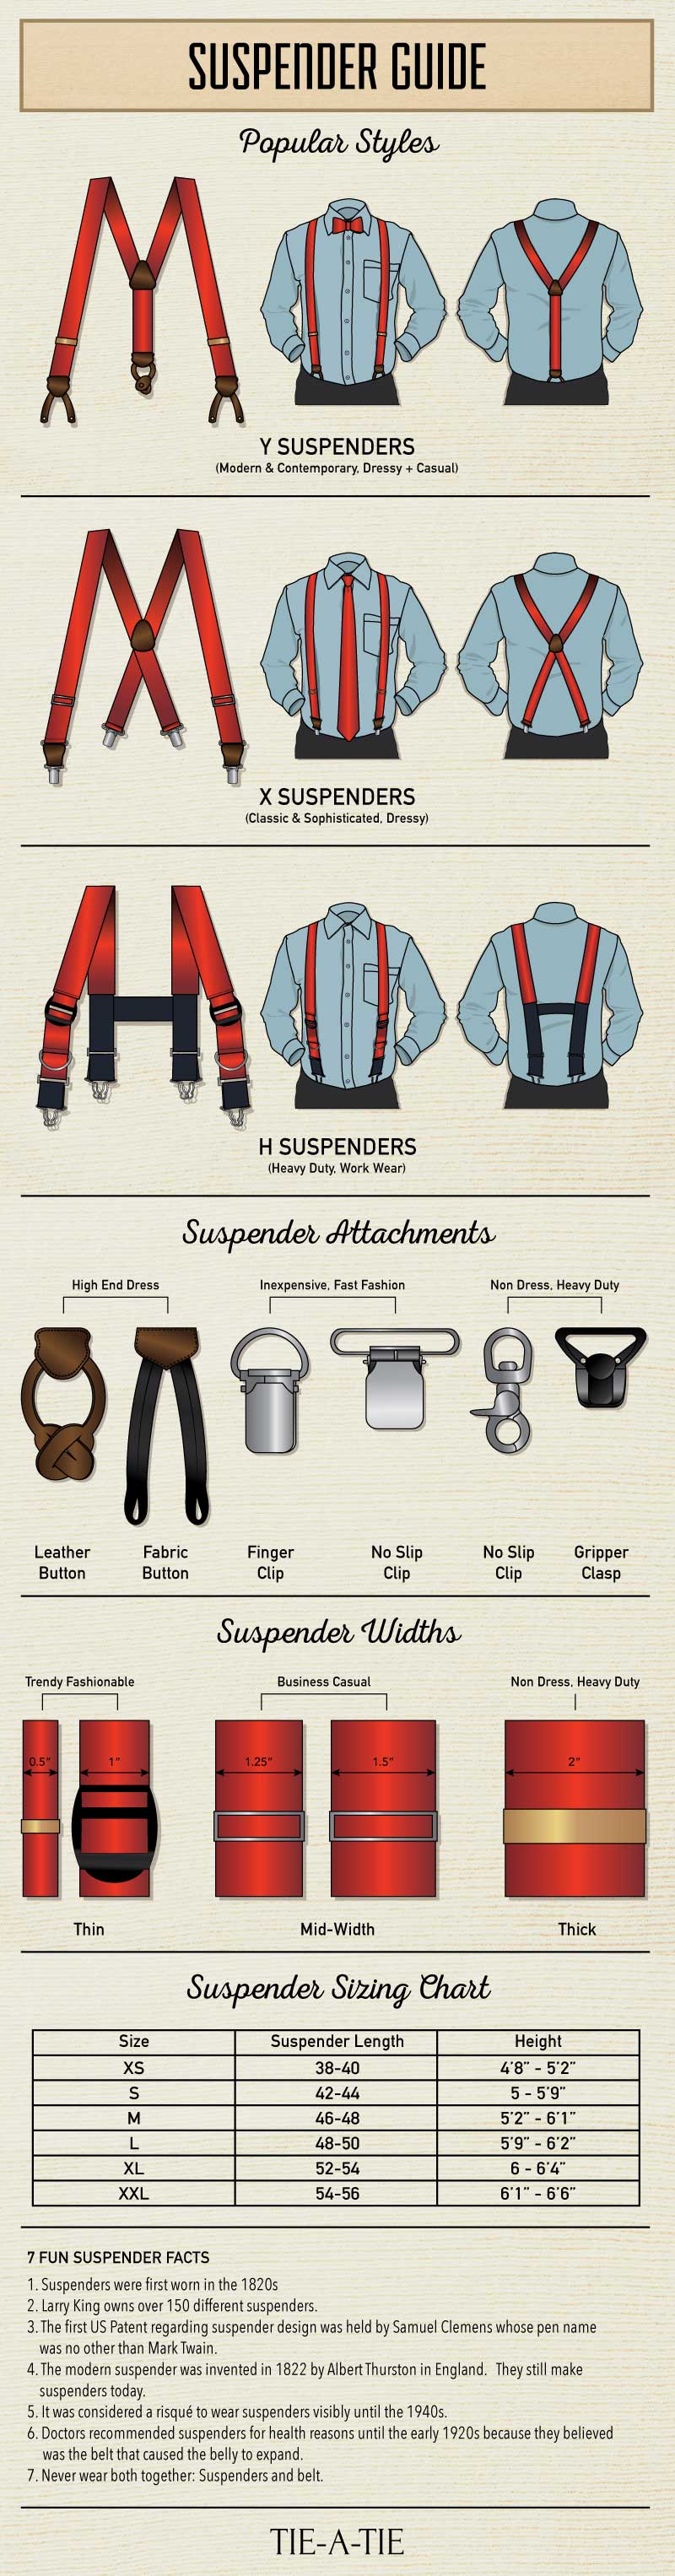 Can You Wear Suspenders with a Graphic T-Shirt?